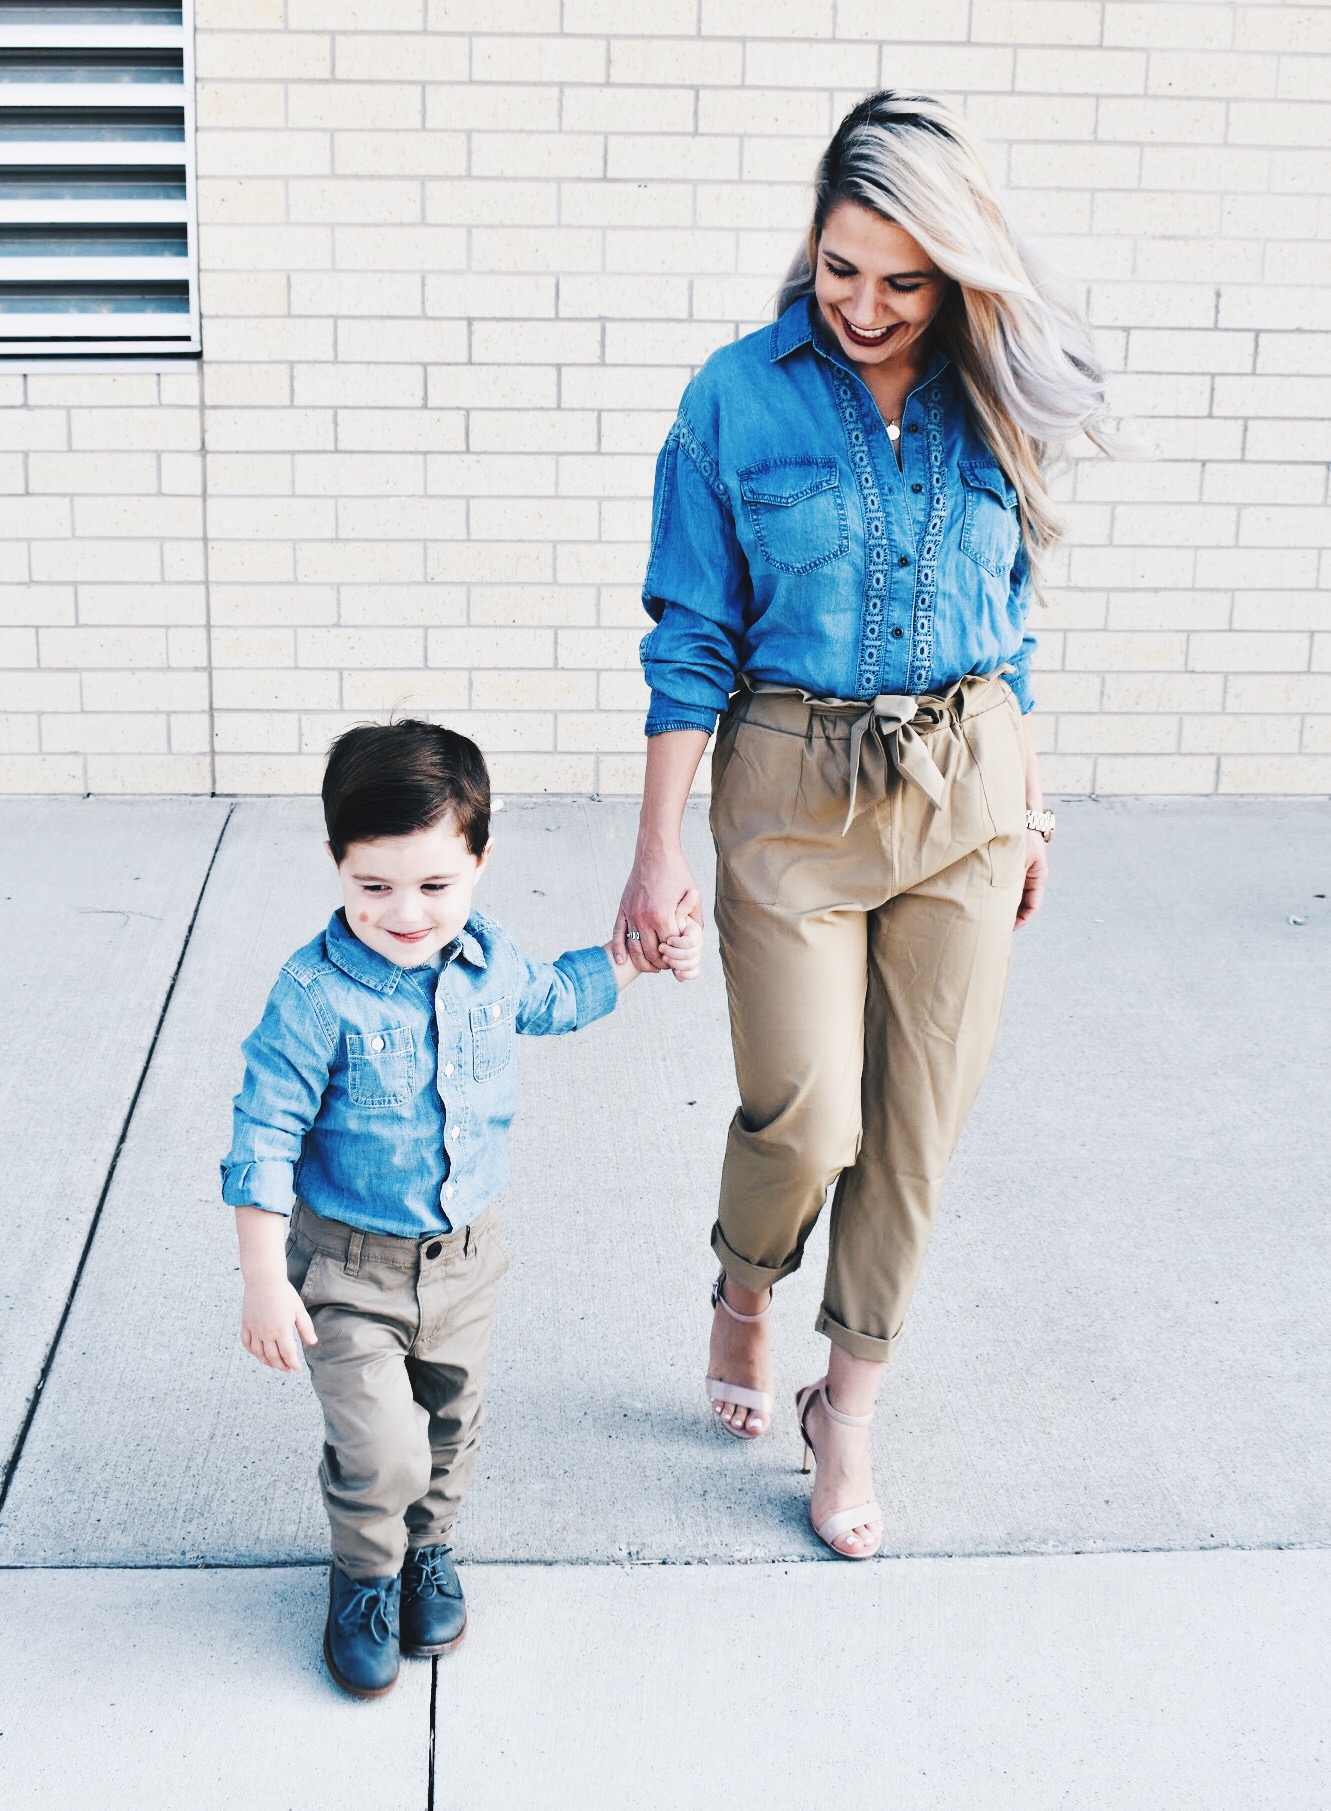 Mommy and Son Matching Outfit Ideas - Mommy and Me Outfits for Boys - Mommy and Me Son Outfits - Outfits for Mommy and Son - Chambray Shirt with Khakis is an outfit that can work for mommy and son! Fashion blogger COVET by tricia shows how to style a chambray shirt with khakis in a mommy and me outfit idea for boy moms. #KidsFashion #MommyandMe #Twinning #BoyMom